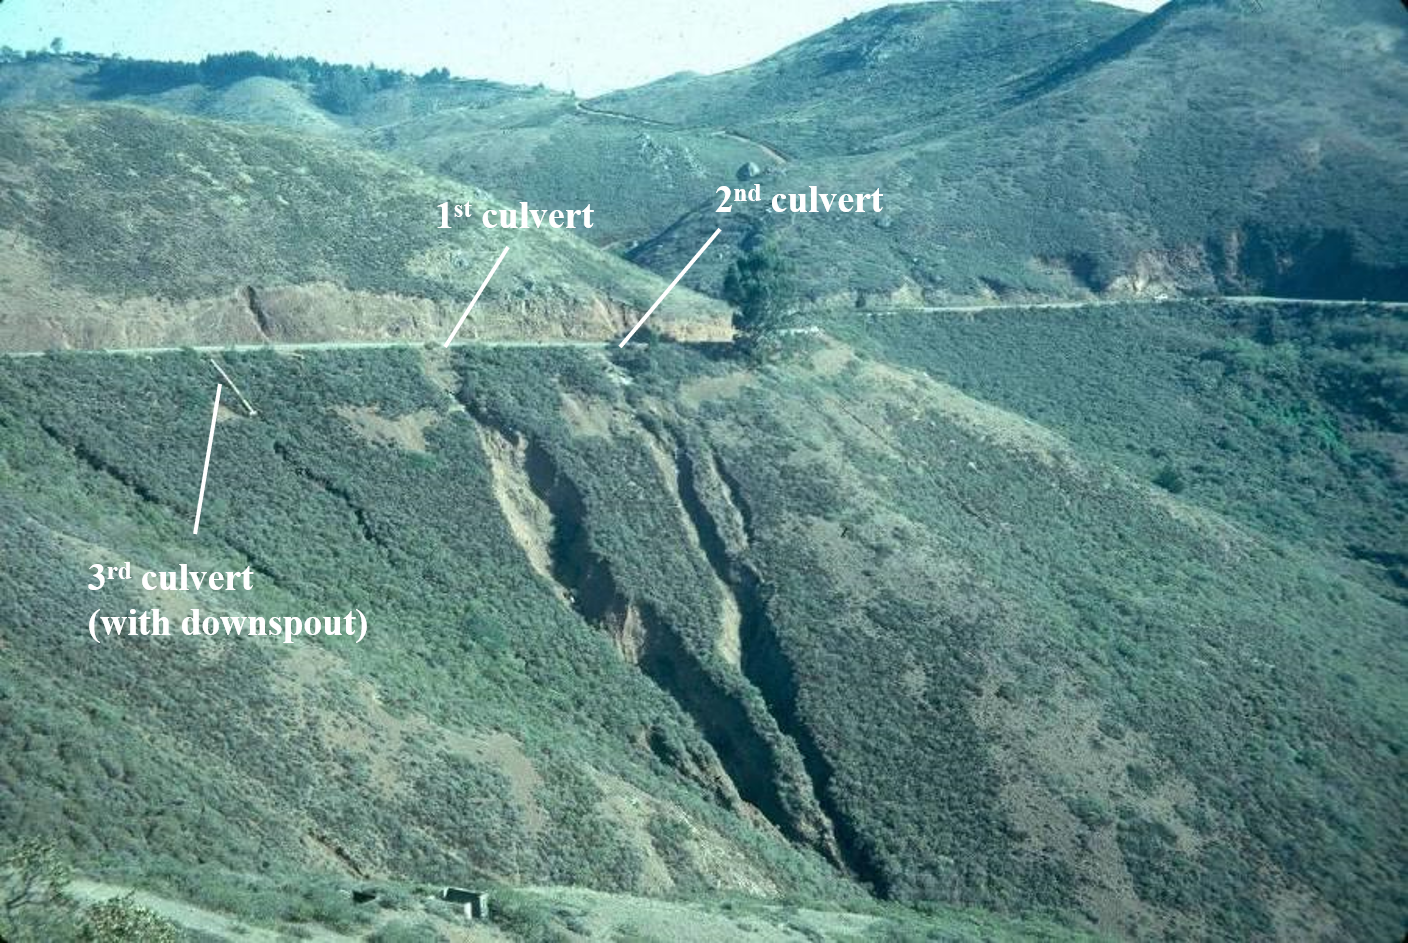 From afar, a road on the side of a hill is shown. The hill is covered with small vegetation, so the gullies that formed at the site of 2 culverts are clearly visible as dirt cuts in the hillside.